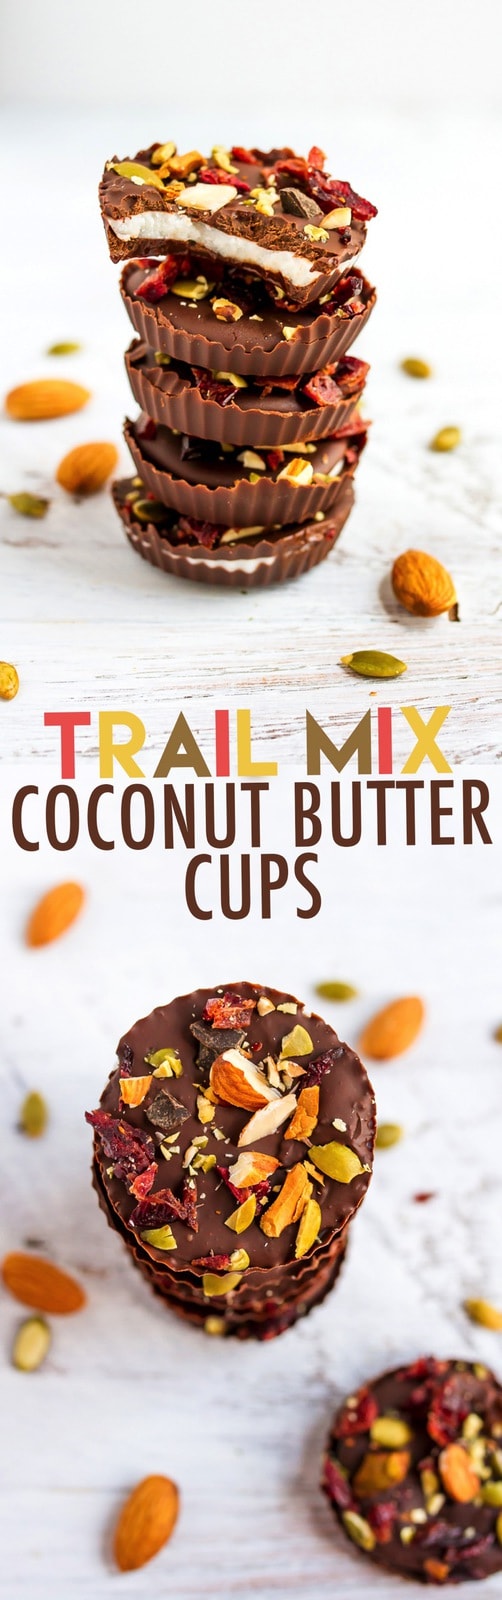 Easy 4-ingredient trail mix coconut butter cups that are vegan, gluten-free and paleo-friendly.